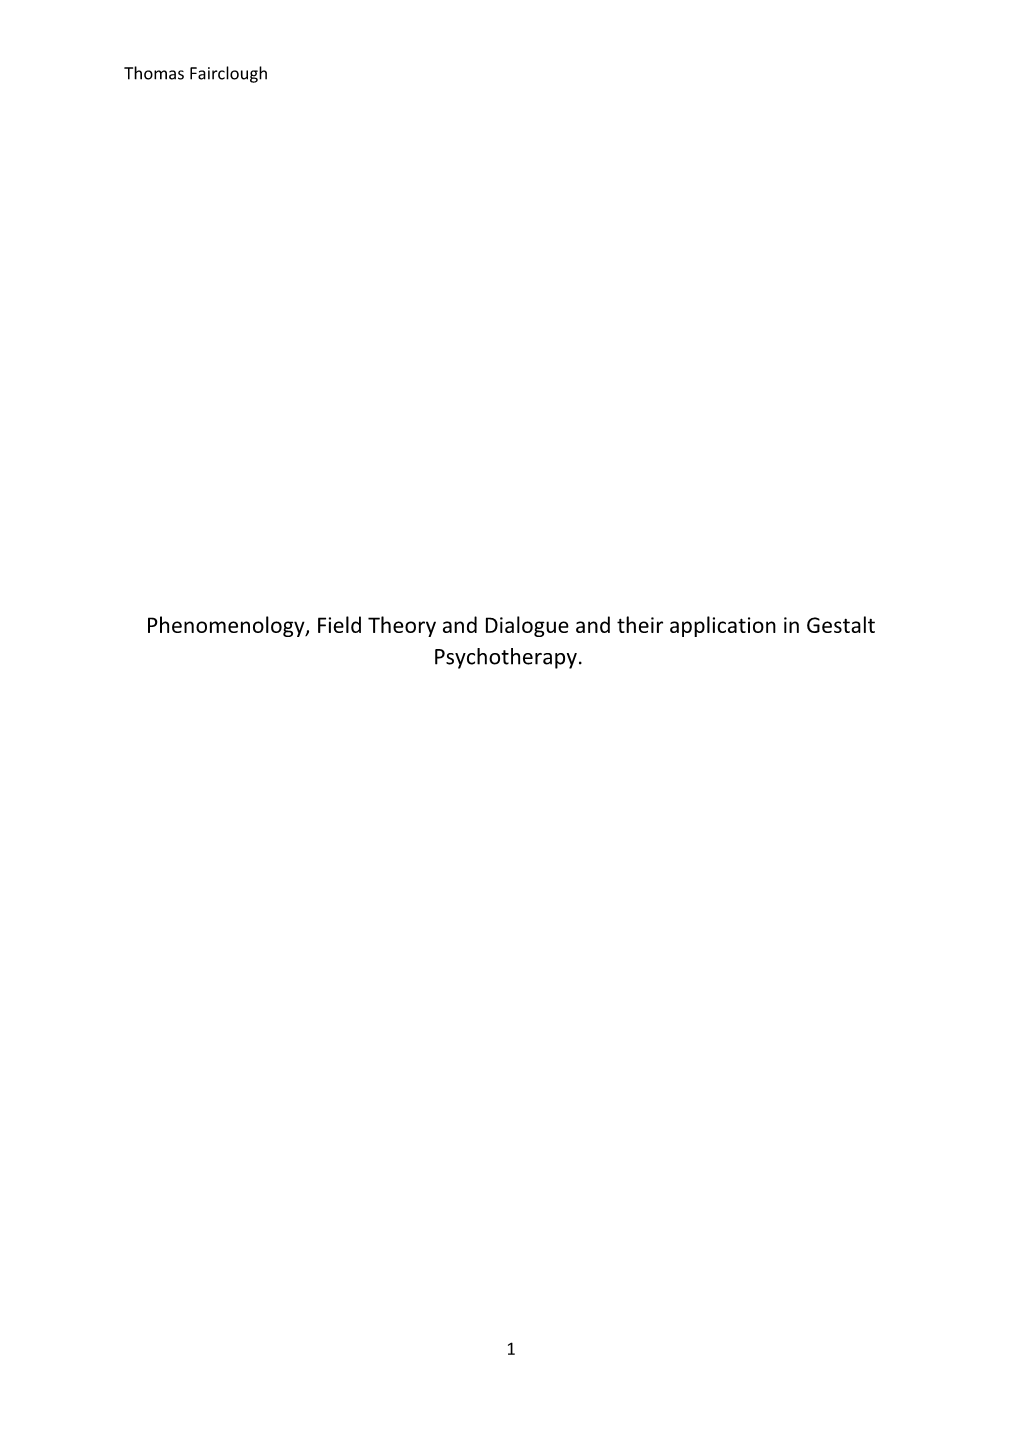 Phenomenology, Field Theory and Dialogue and Their Application in Gestalt Psychotherapy